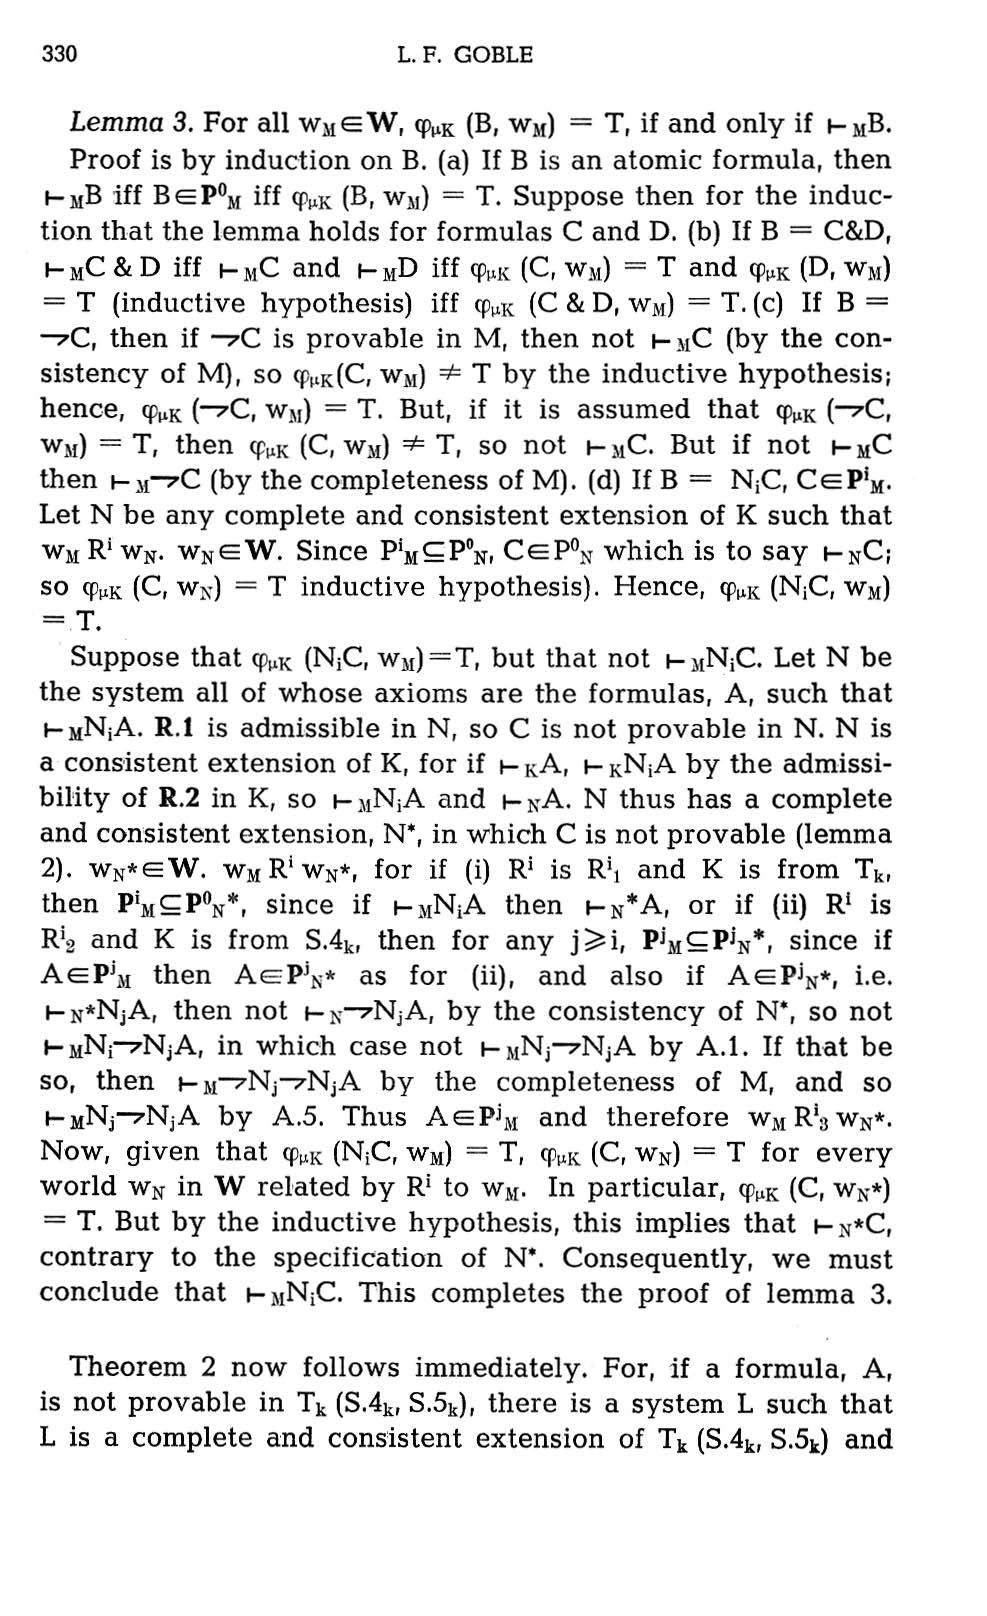 330 L. F. GOBLE Lemma 3. For all w Proof is by induction on B. (a) If B is an atomic formula, then m tion that the lemma holds for formulas C and D.